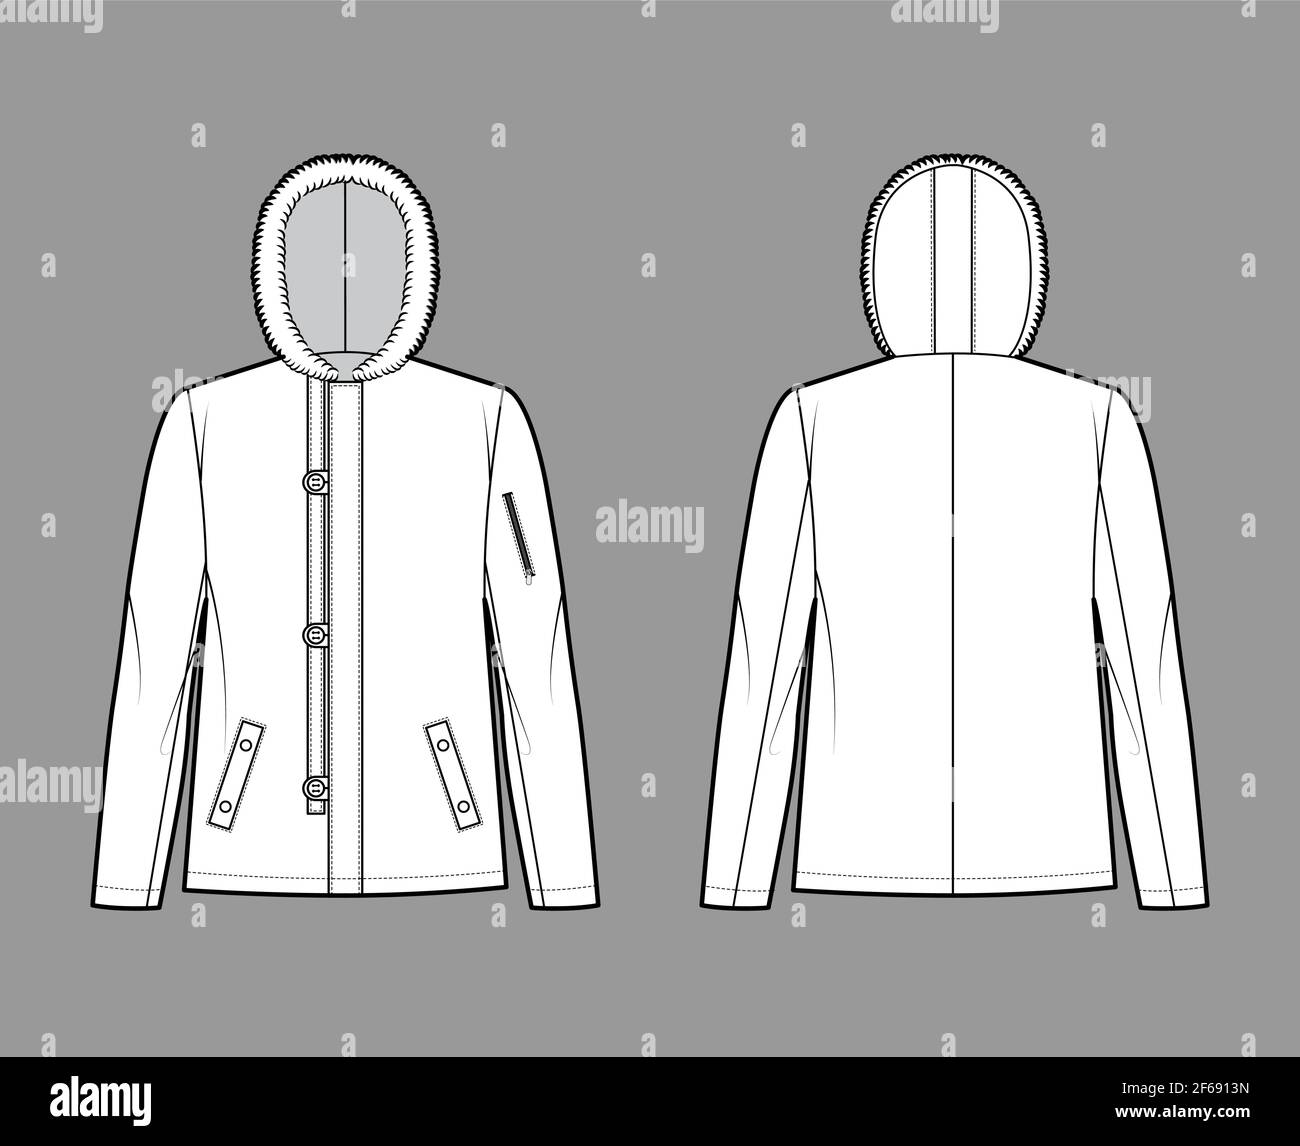 N-2B flight jacket technical fashion illustration with oversized, fur hood, long sleeves, flap pockets, button loop opening. Flat coat template front, back white color style. Women men top CAD mockup Stock Vector